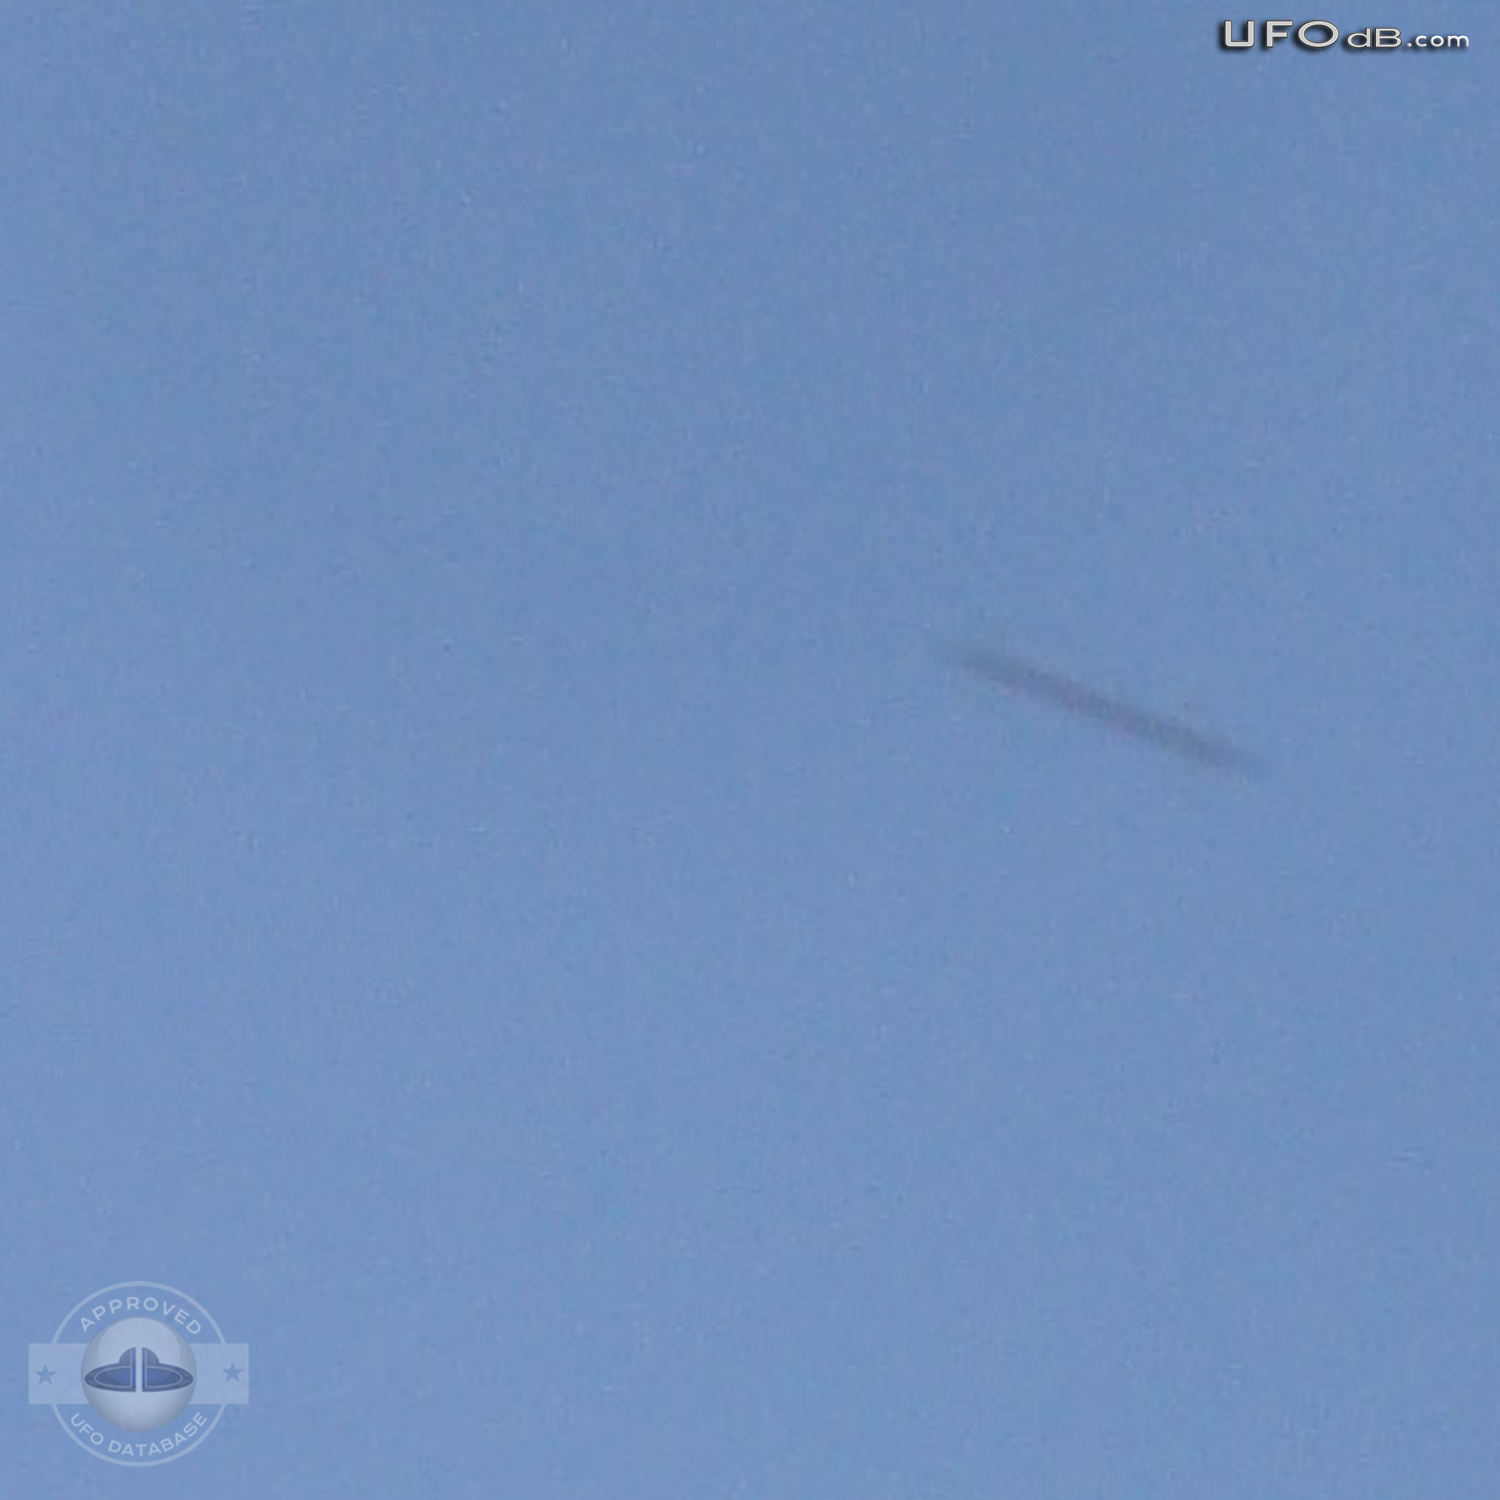 Guarulhos Airport, Brazil | UFO near airplane taking off | April 2011 UFO Picture #337-3